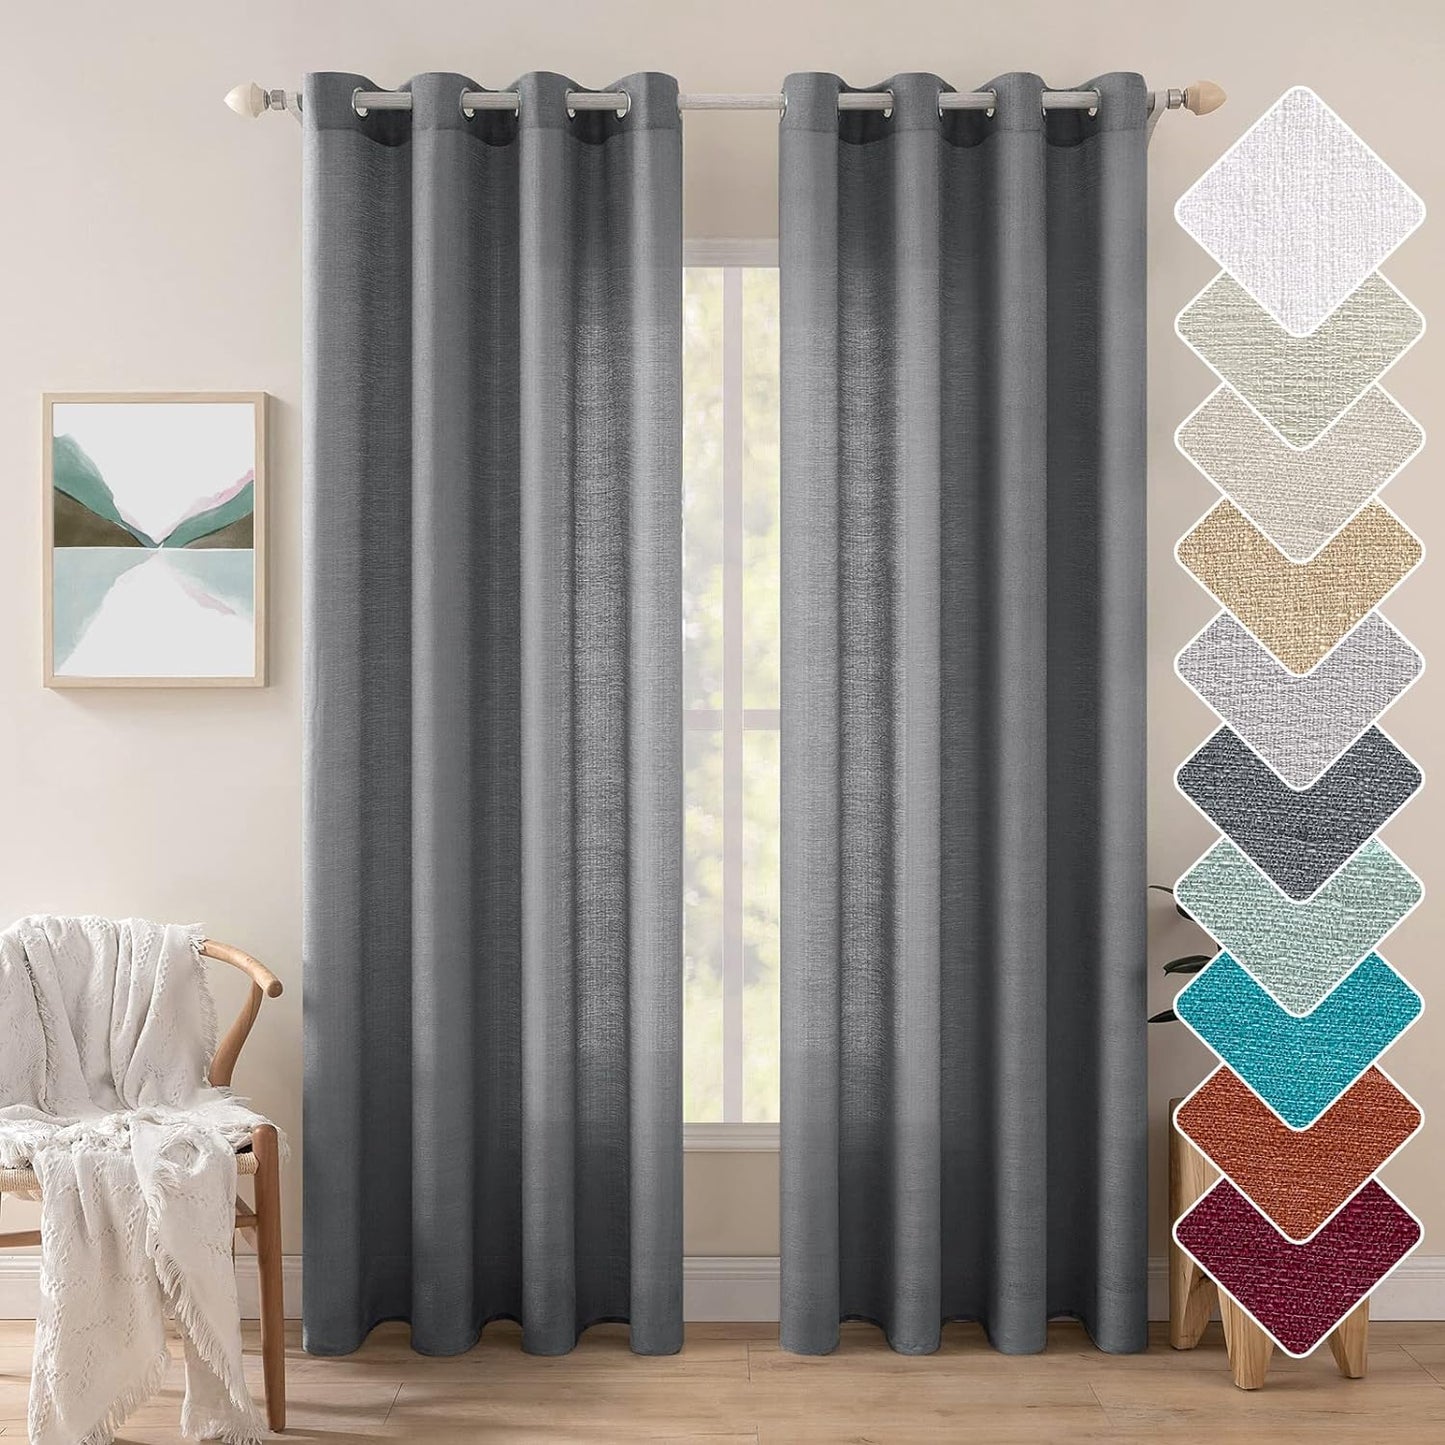 MIULEE Burnt Orange Linen Semi Sheer Curtains 2 Panels for Living Room Bedroom Linen Textured Light Filtering Privacy Window Curtains Terracotta Grommet Drapes Rust Boho Fall Decor W 52 X L 84 Inches  MIULEE Grommet | Dark Grey W52 X L84 